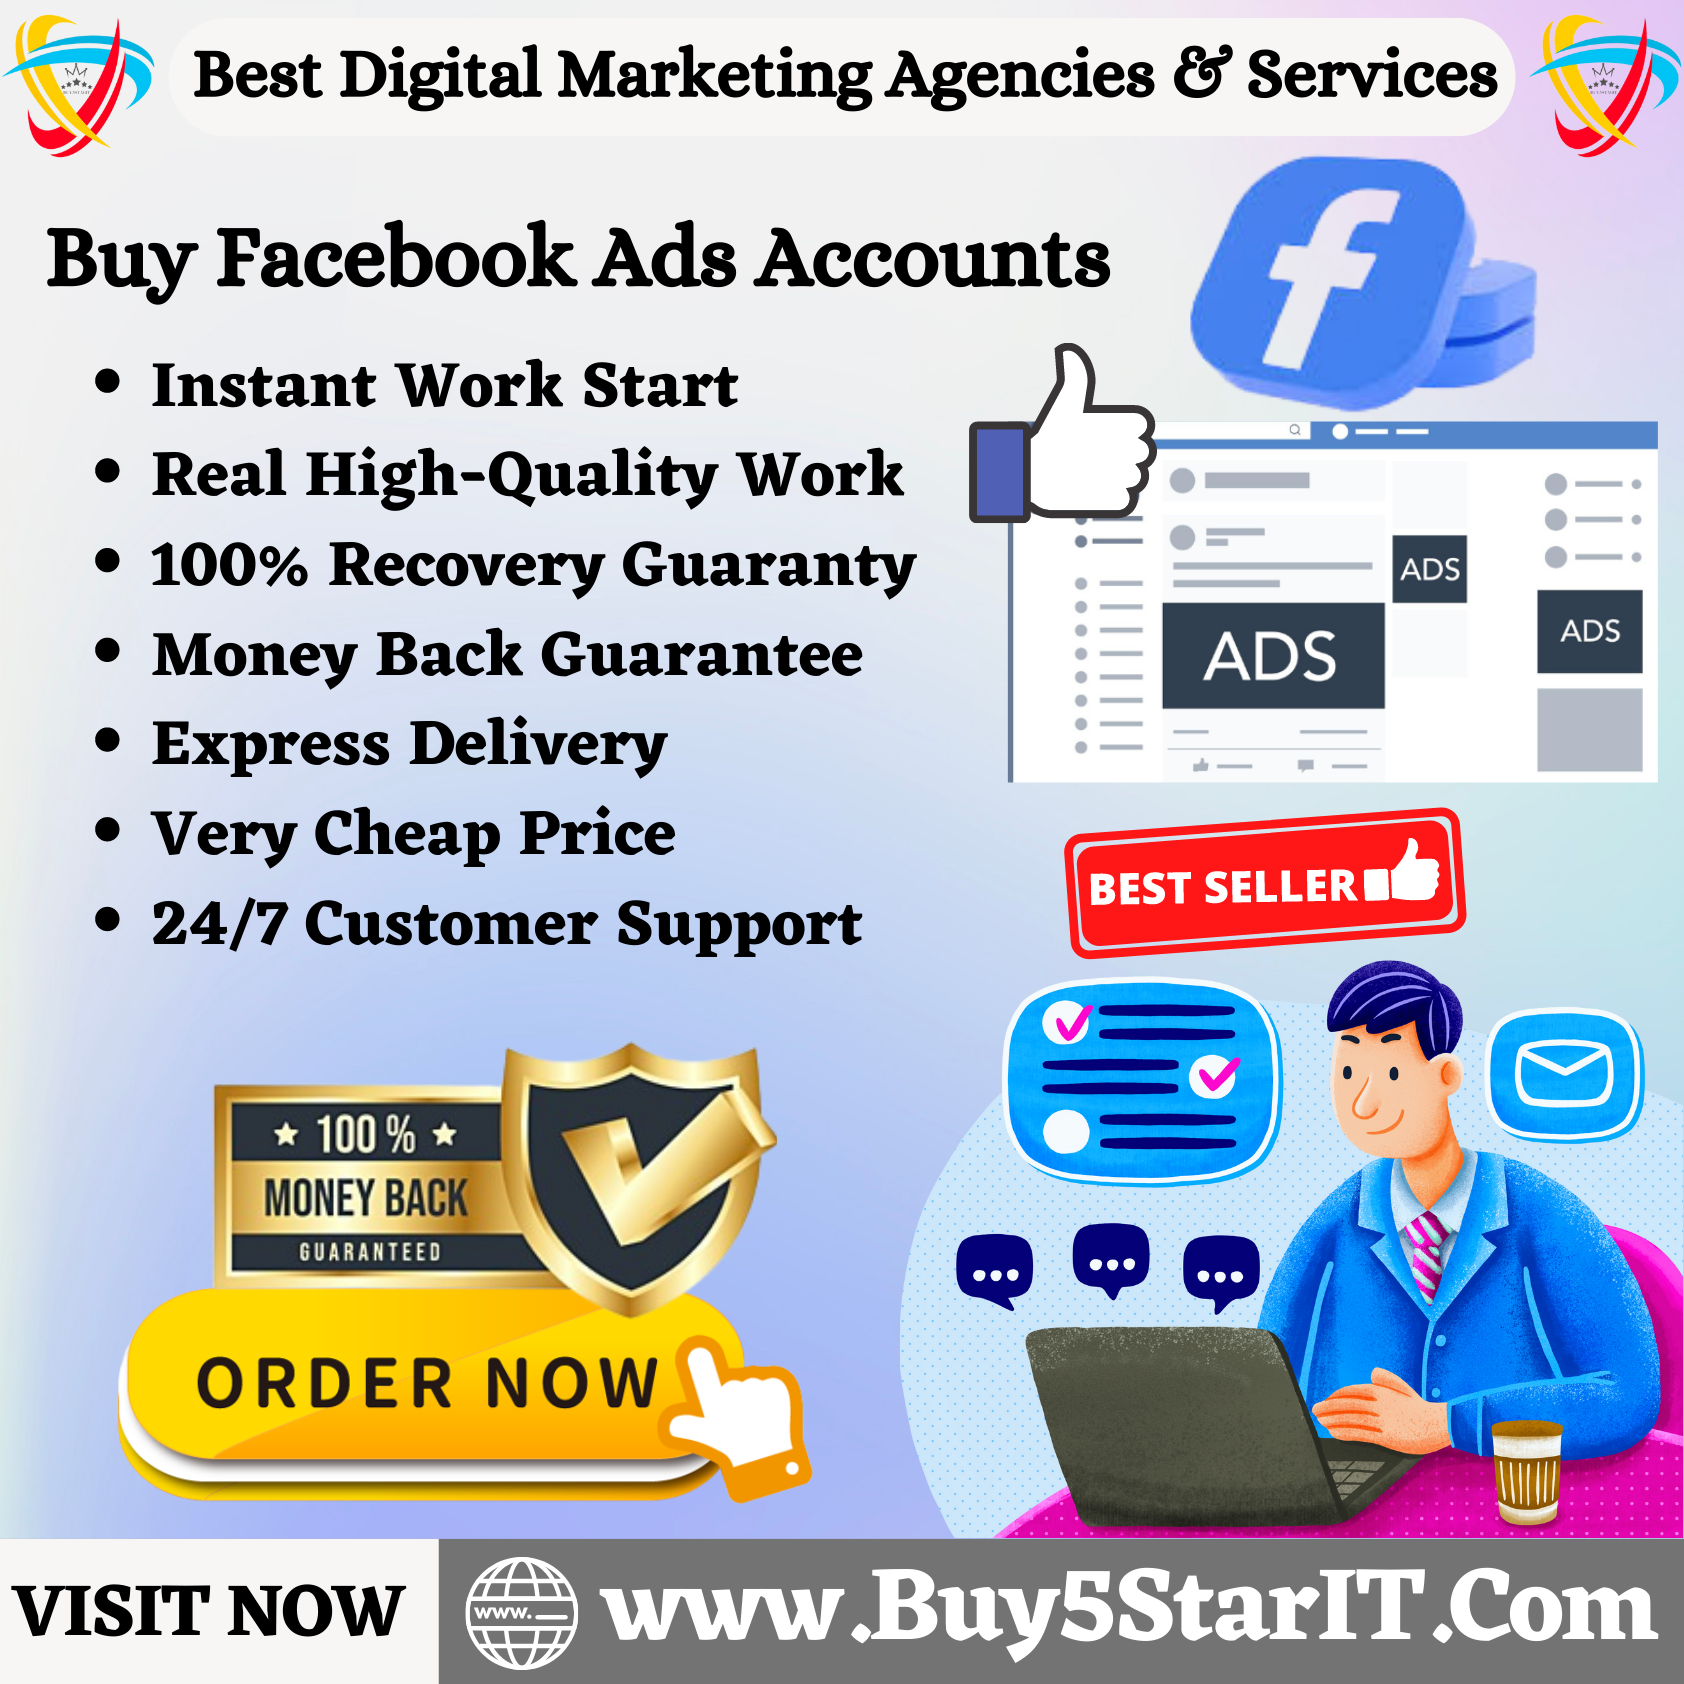 Buy Facebook Ads Accounts - 100% Safe & Documents Verified..